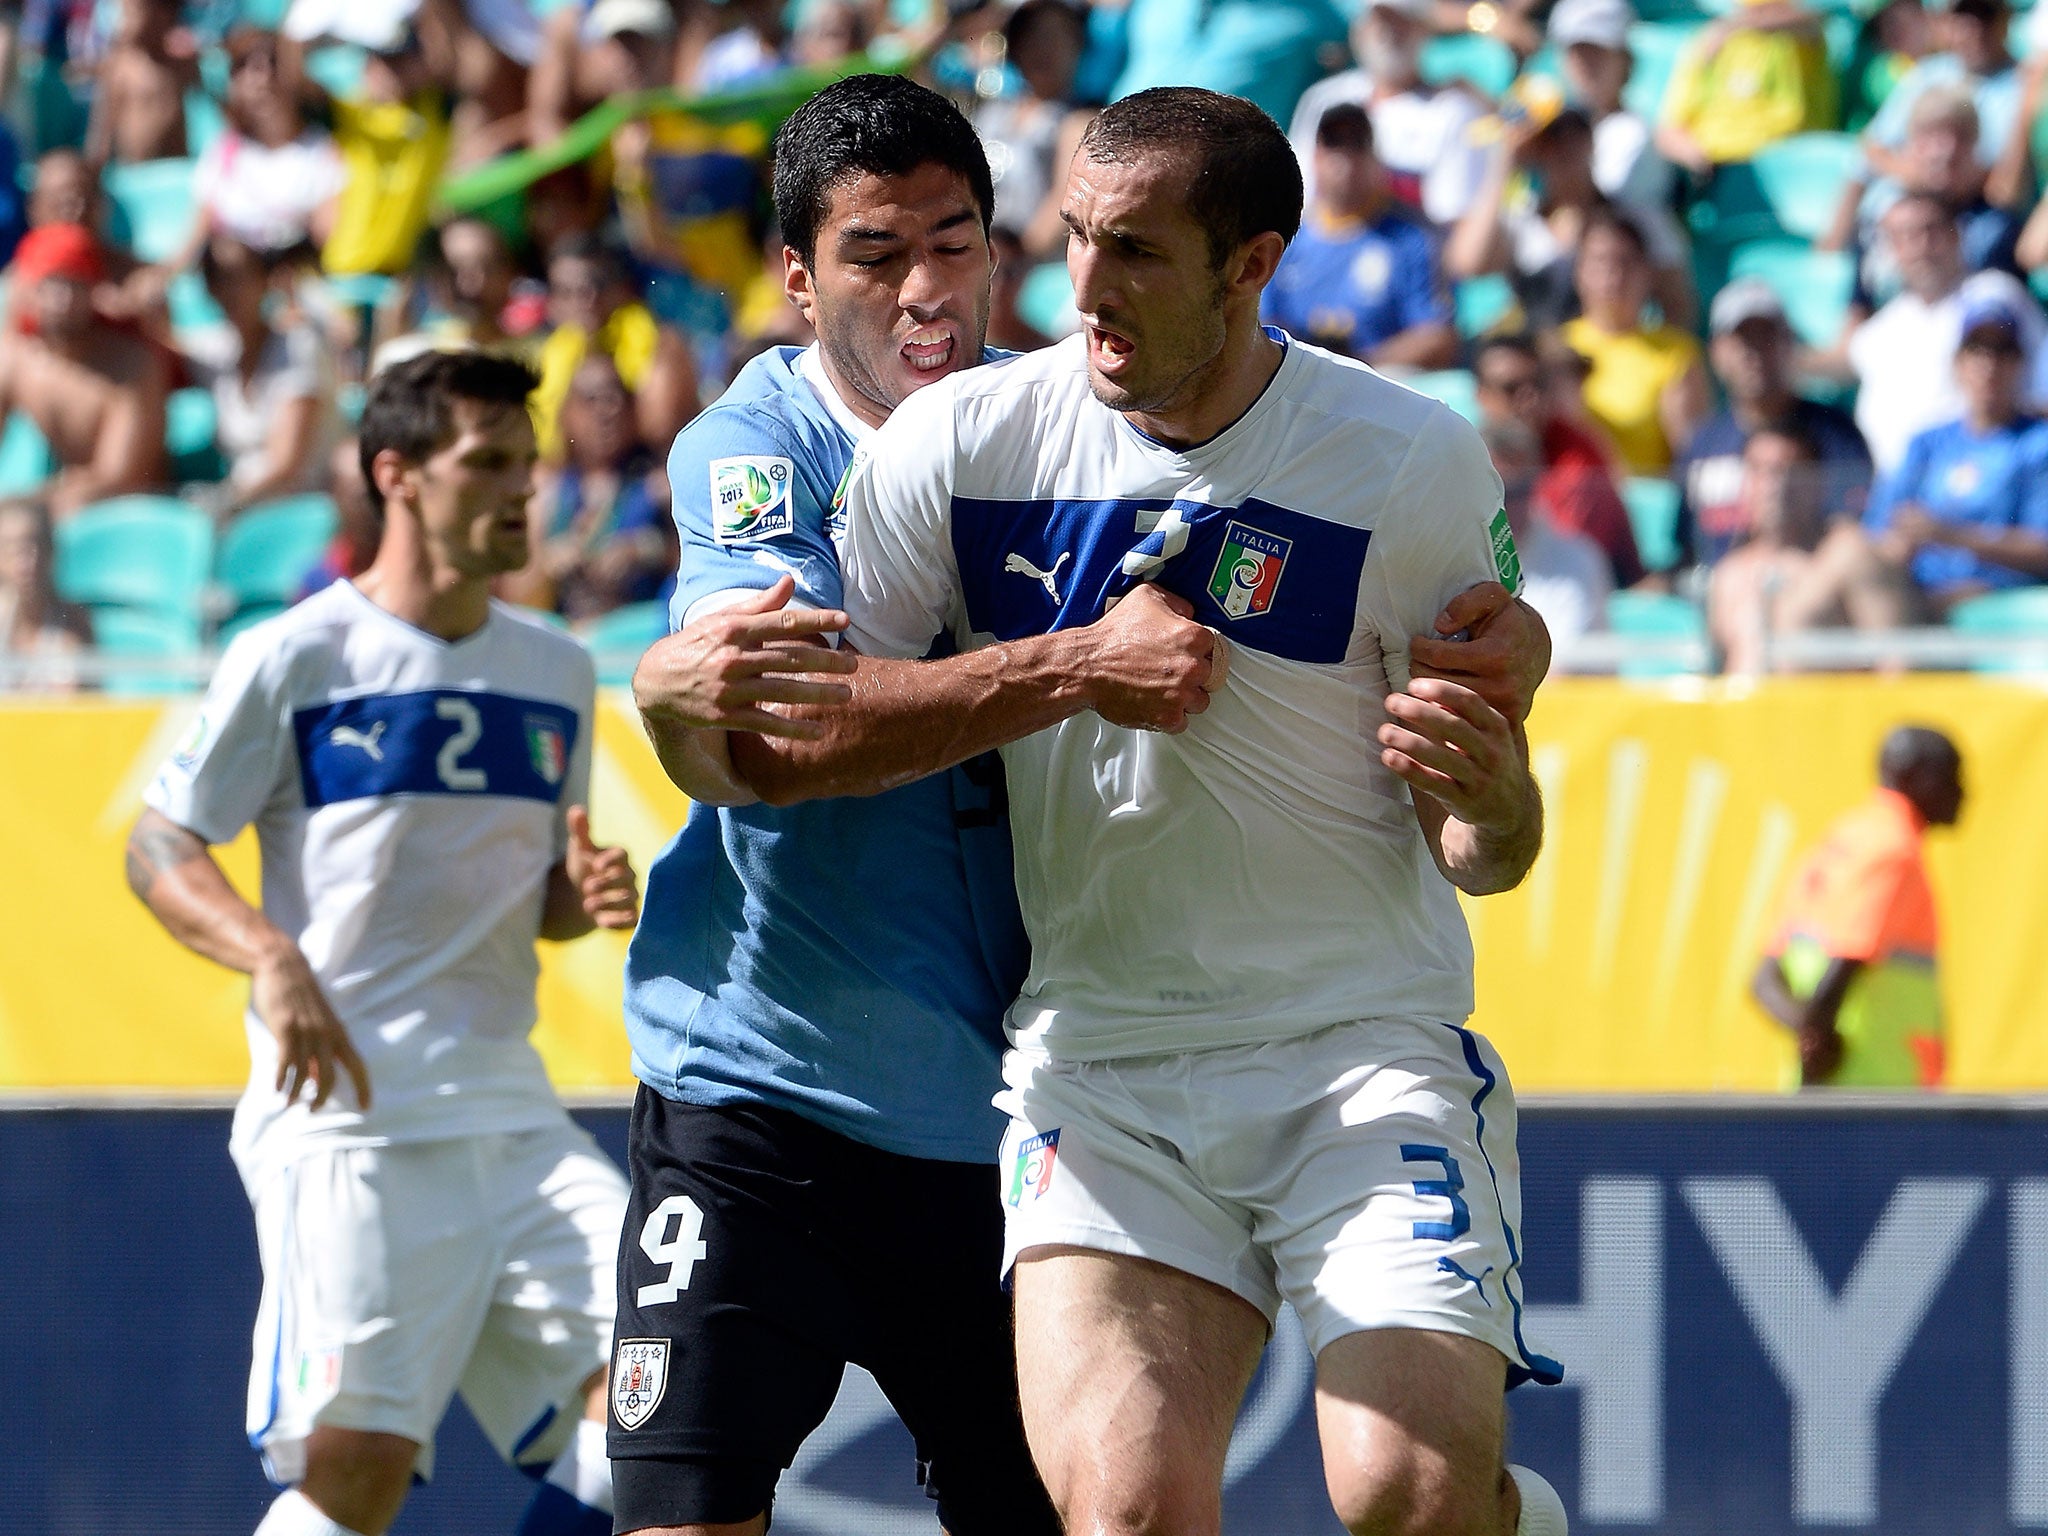 Suarez can be seen trying to bite Chiellini's shoulder during the match